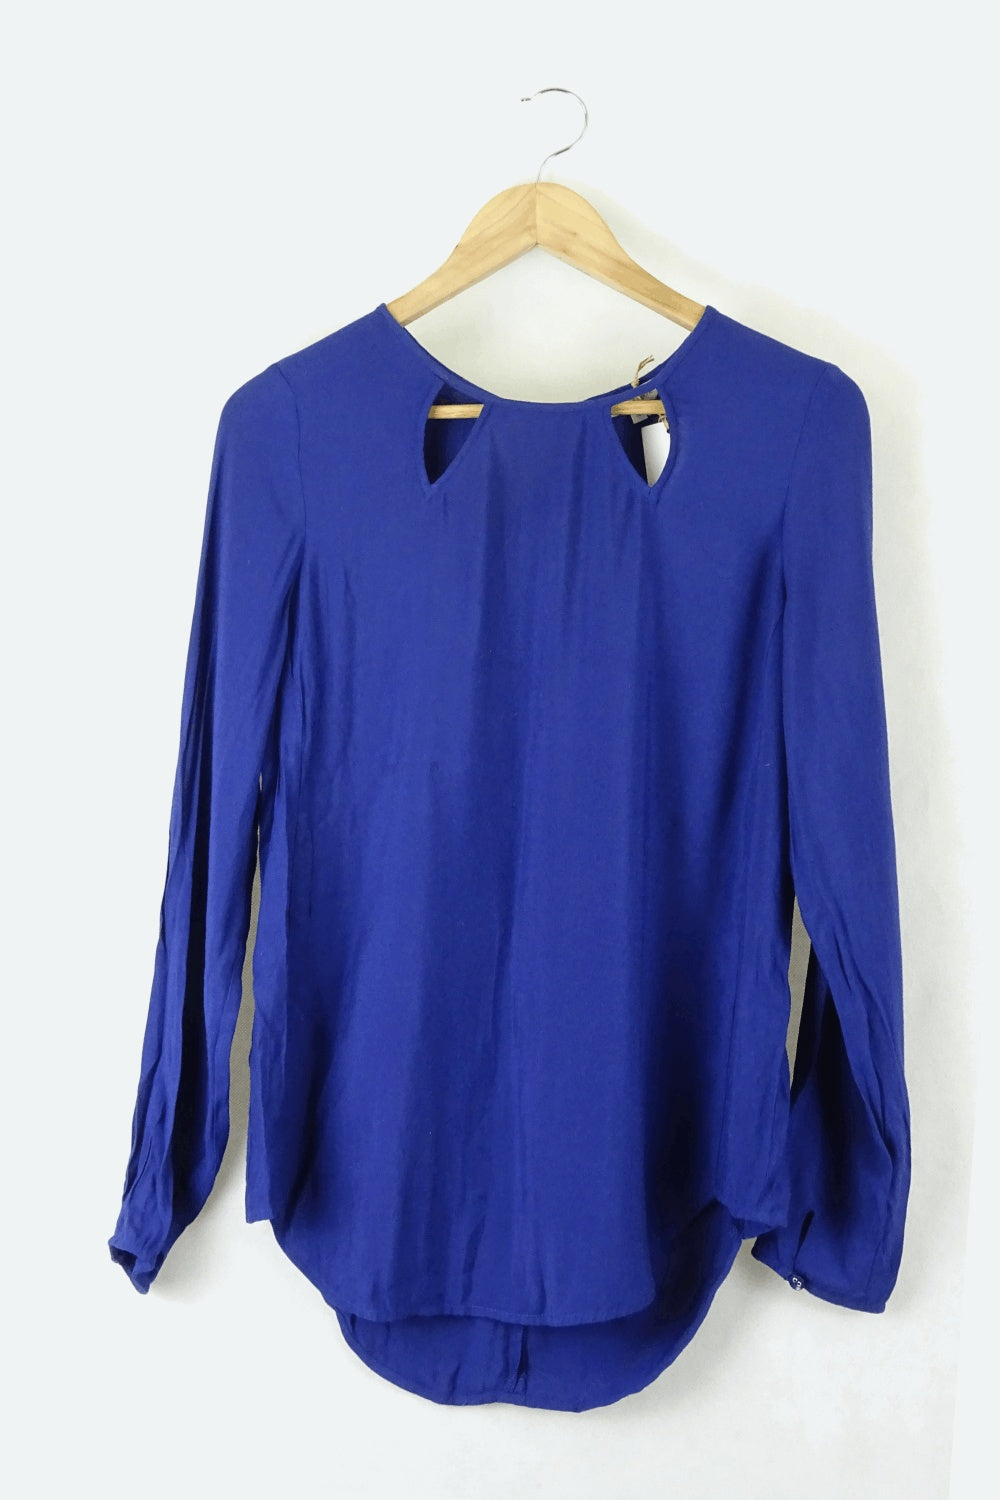 Veronika Maine Blue Long Sleeve Fitted Top 10